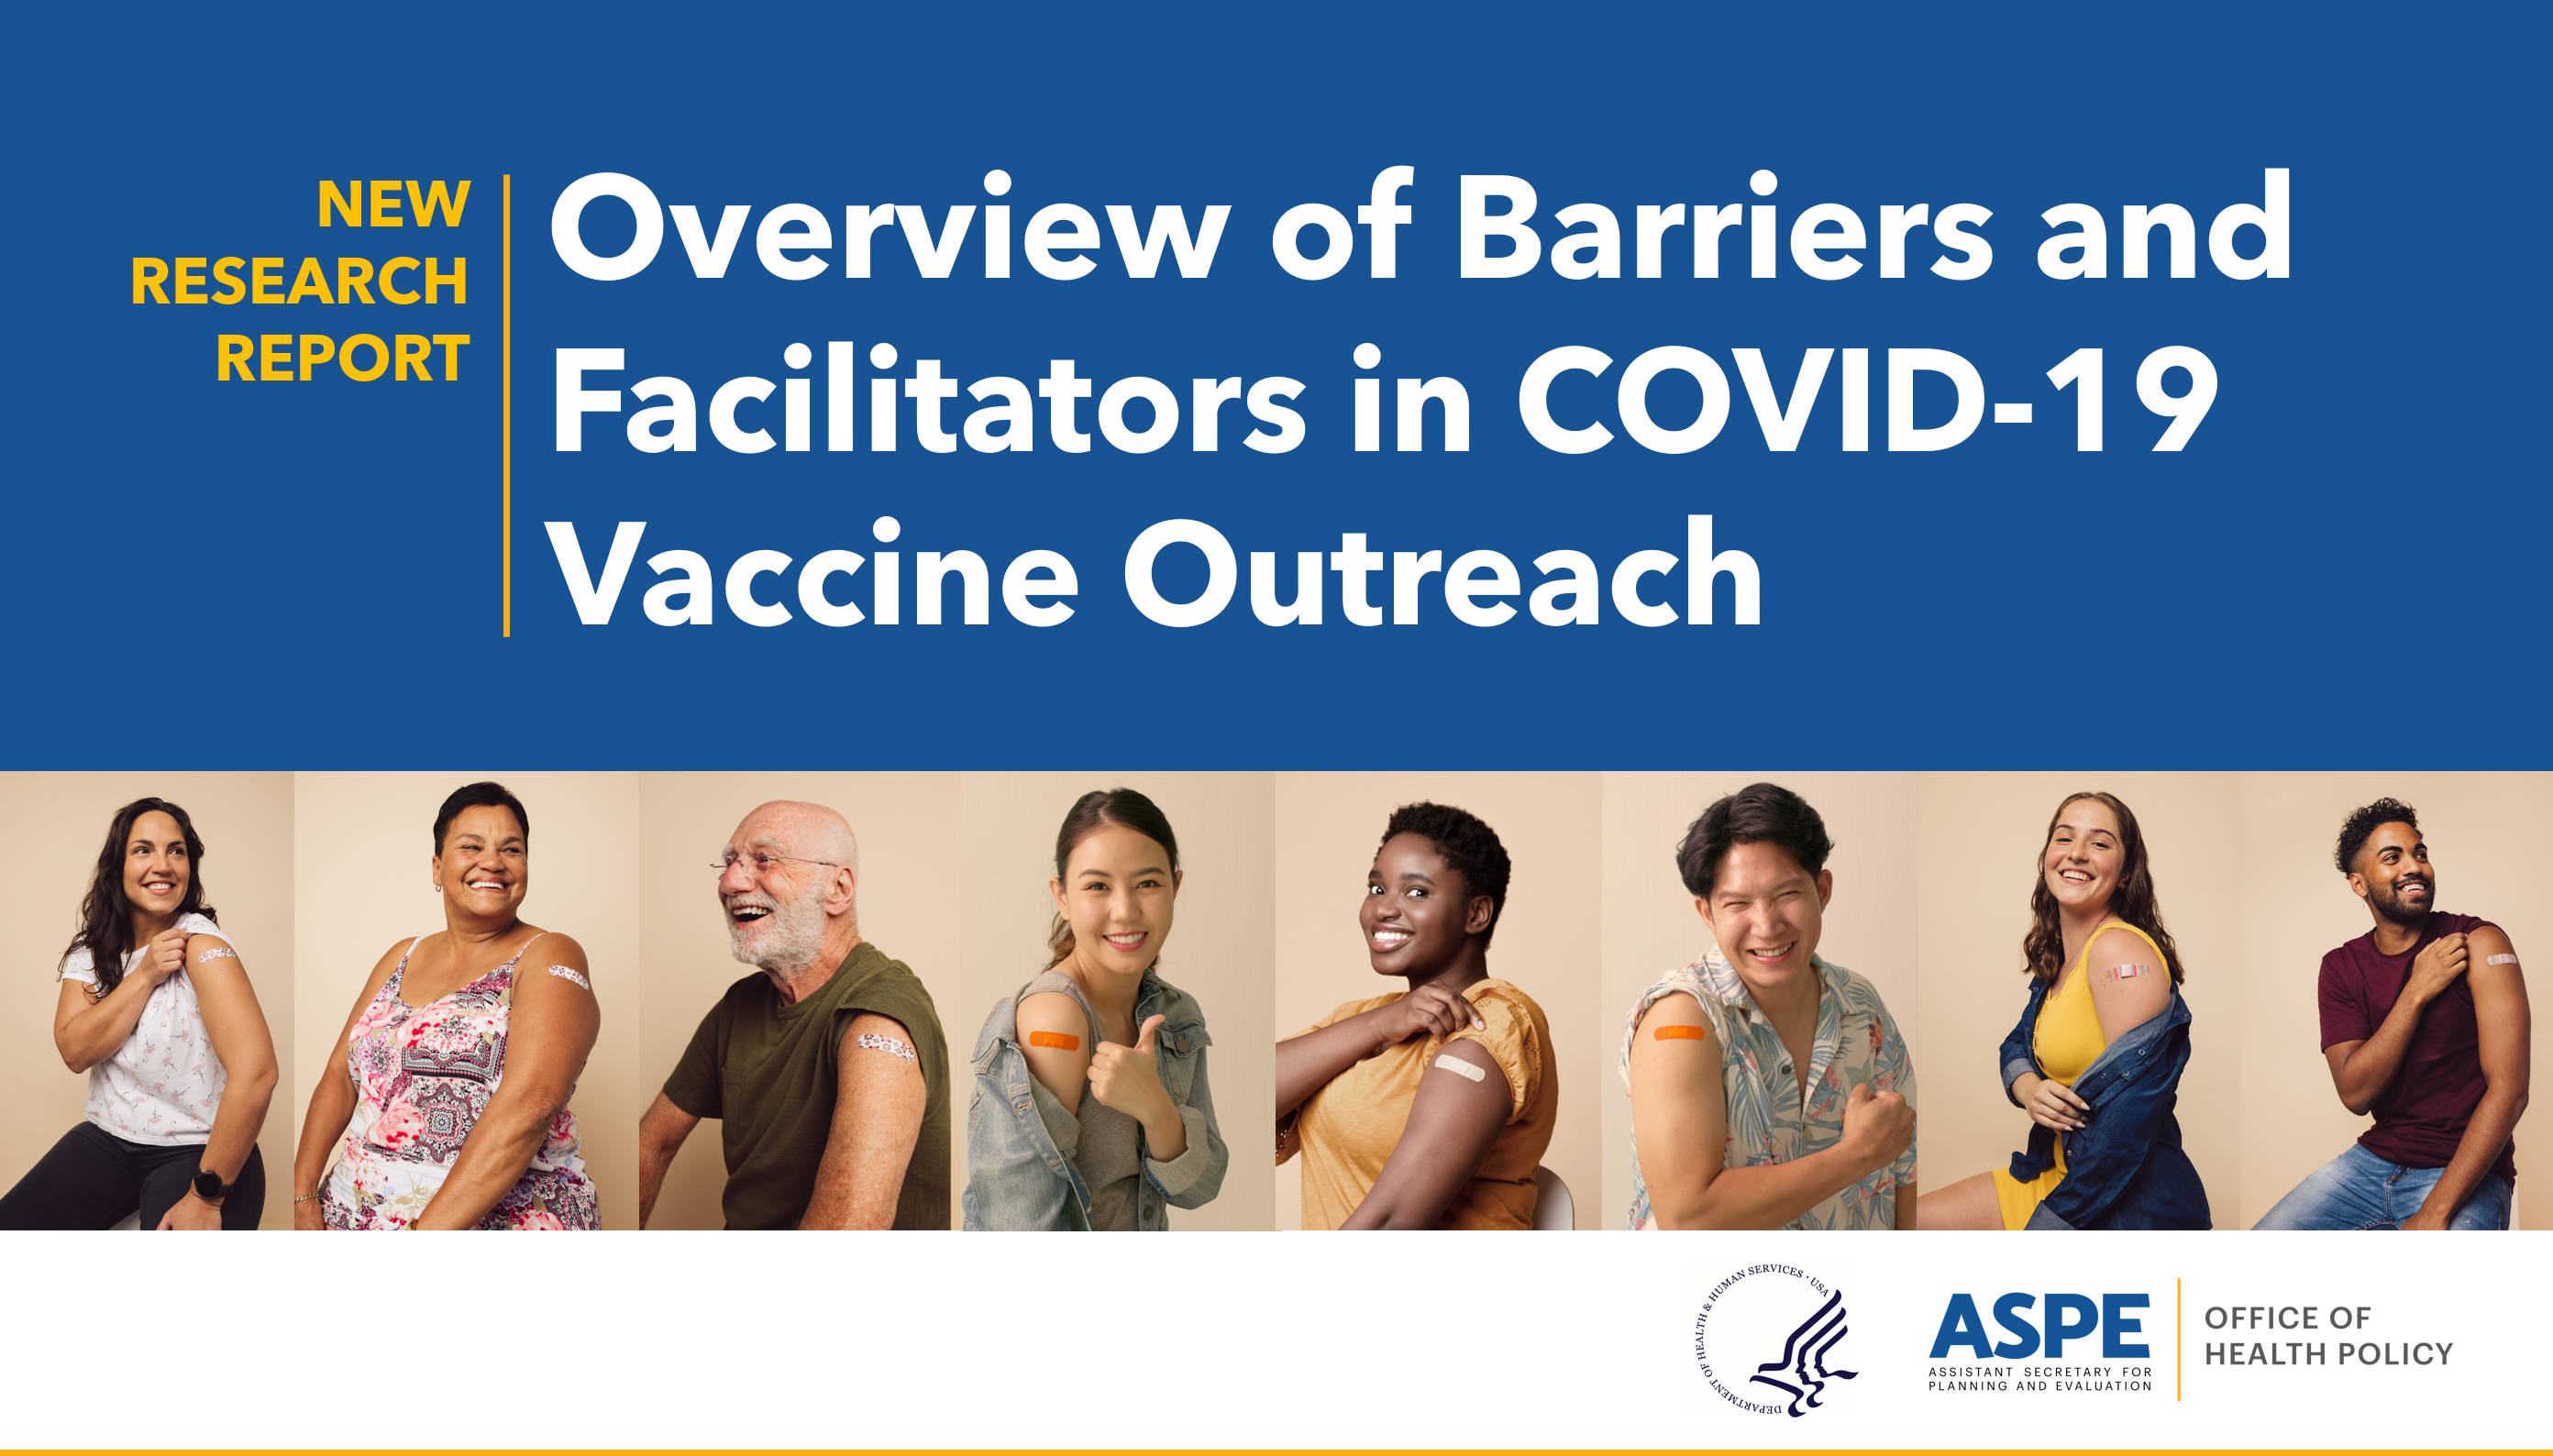 New Research Report: Overview of Barriers and Facilitators in COVID-19 Vaccine Outreach. Featuring people they are vaccinated.